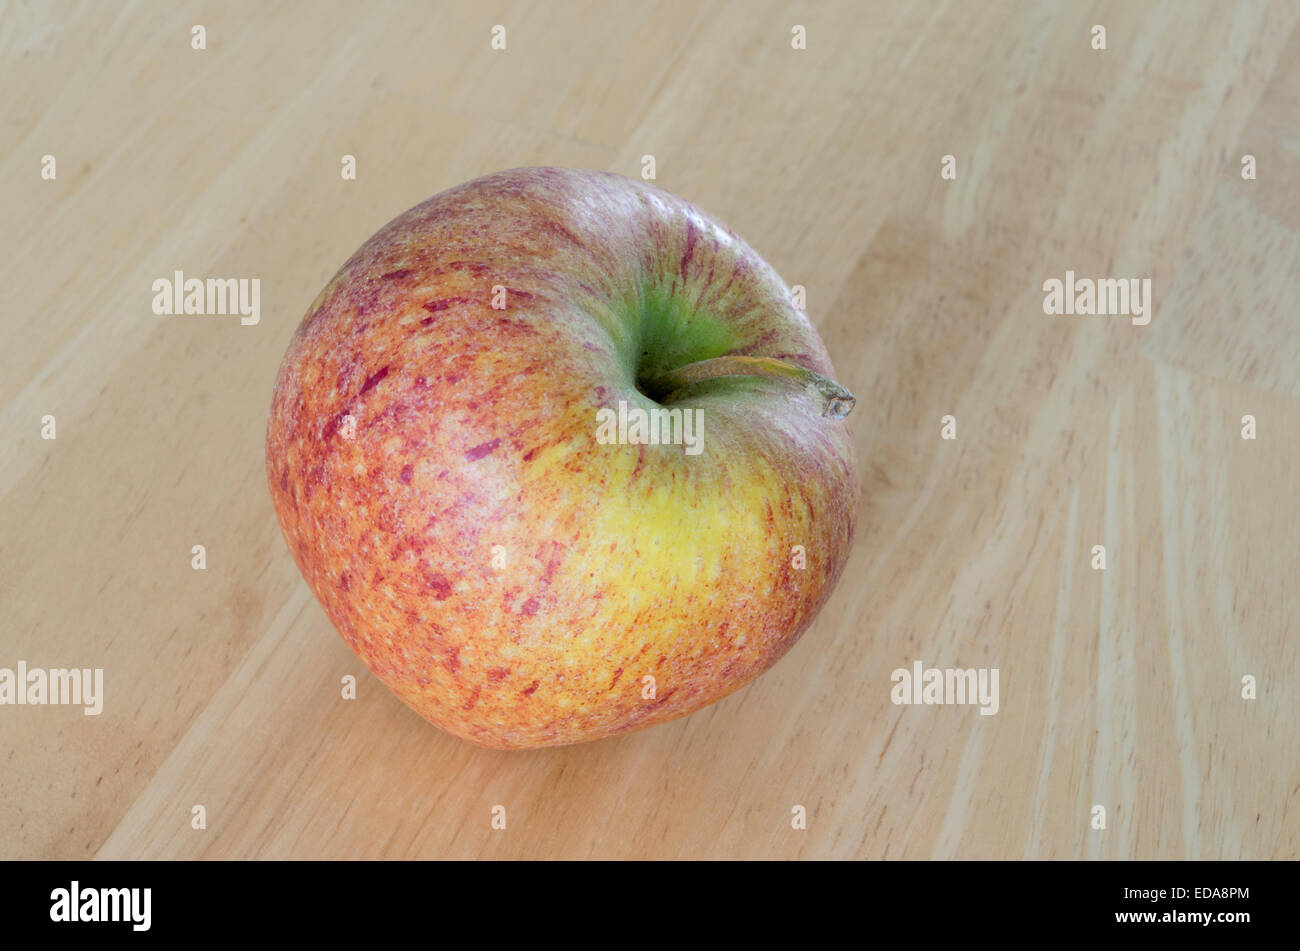 Apple ( Malus x domestica ) cultivar 'Cameo' on a Wooden Background Stock Photo